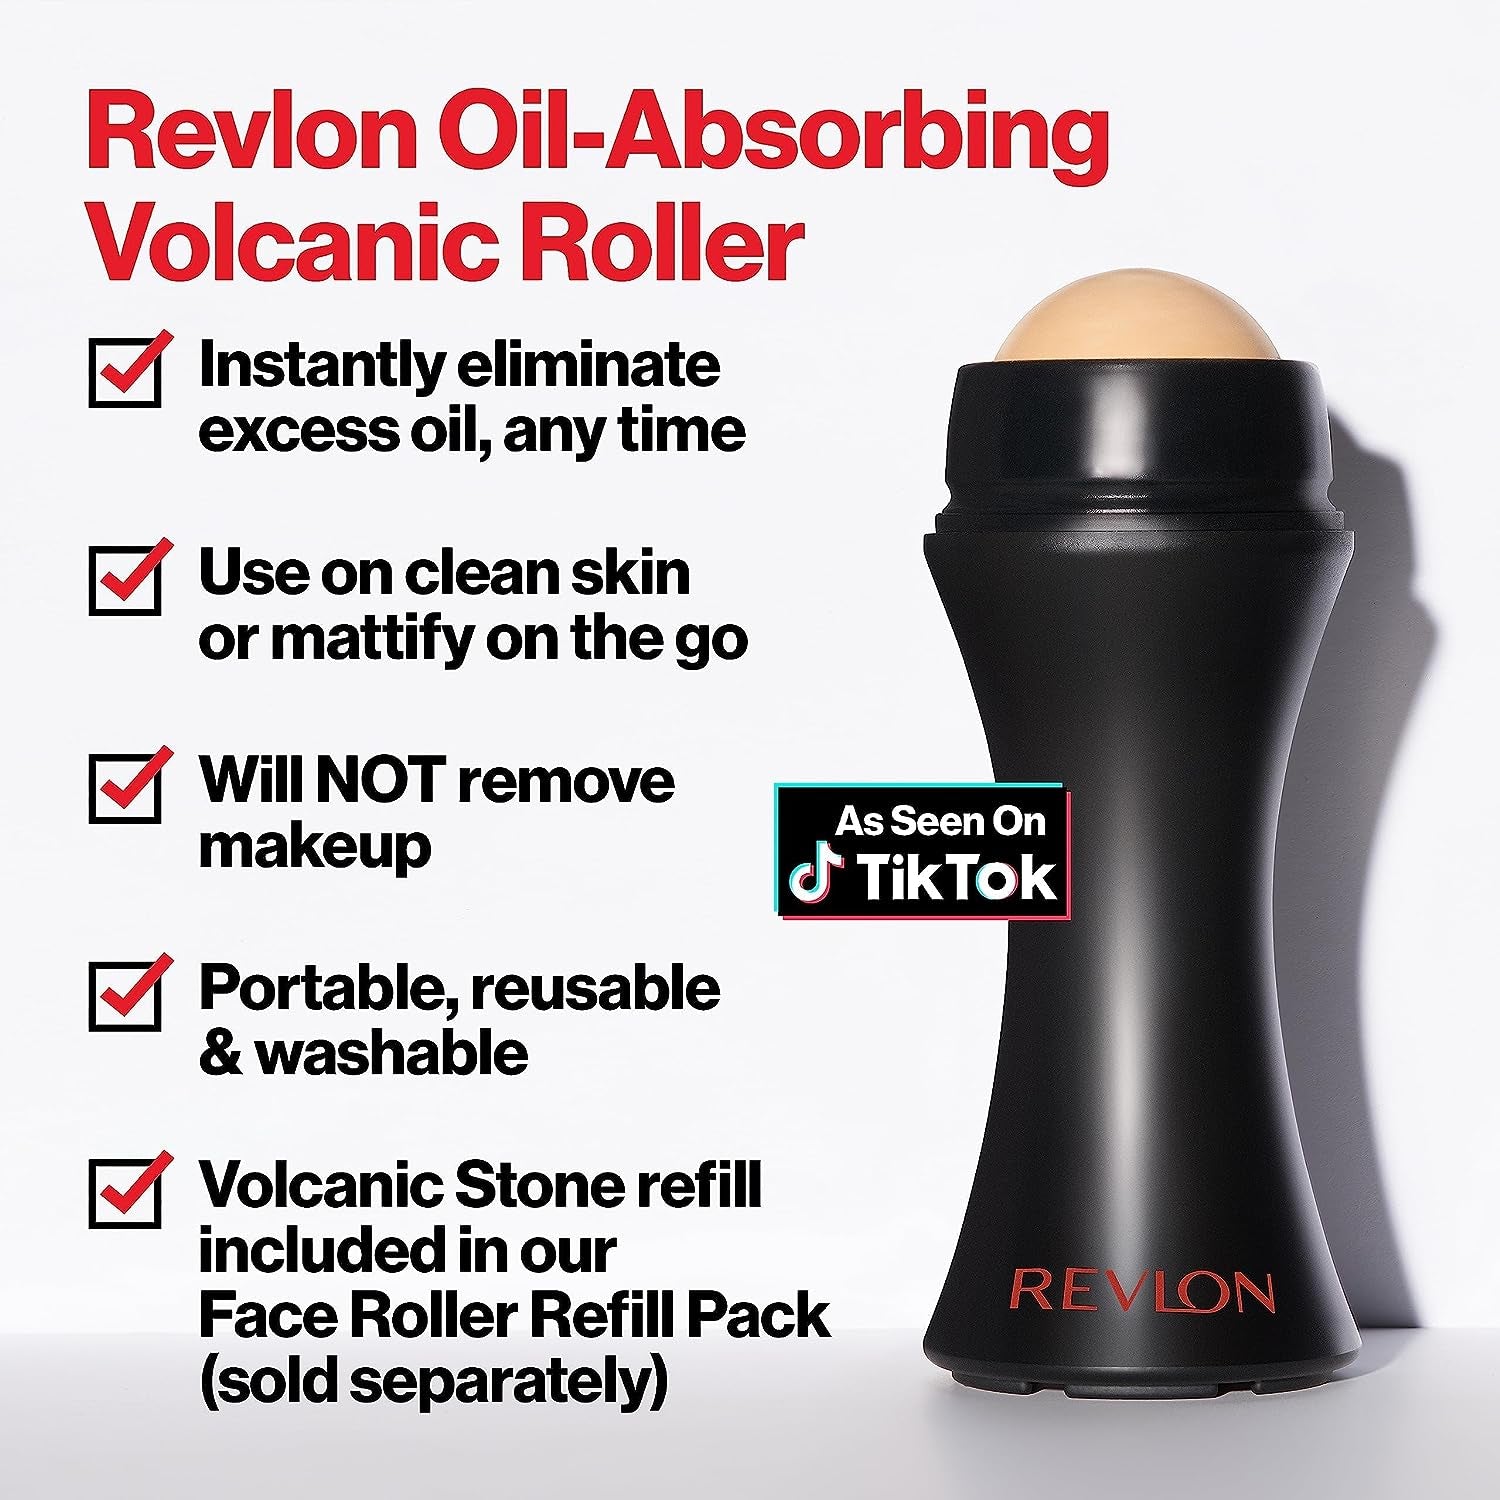 Face Roller, Oily Skin Control for Face Makeup, Oil Absorbing, Volcanic Reusable Facial Skincare Tool for At-Home or On-The-Go Mini Massage